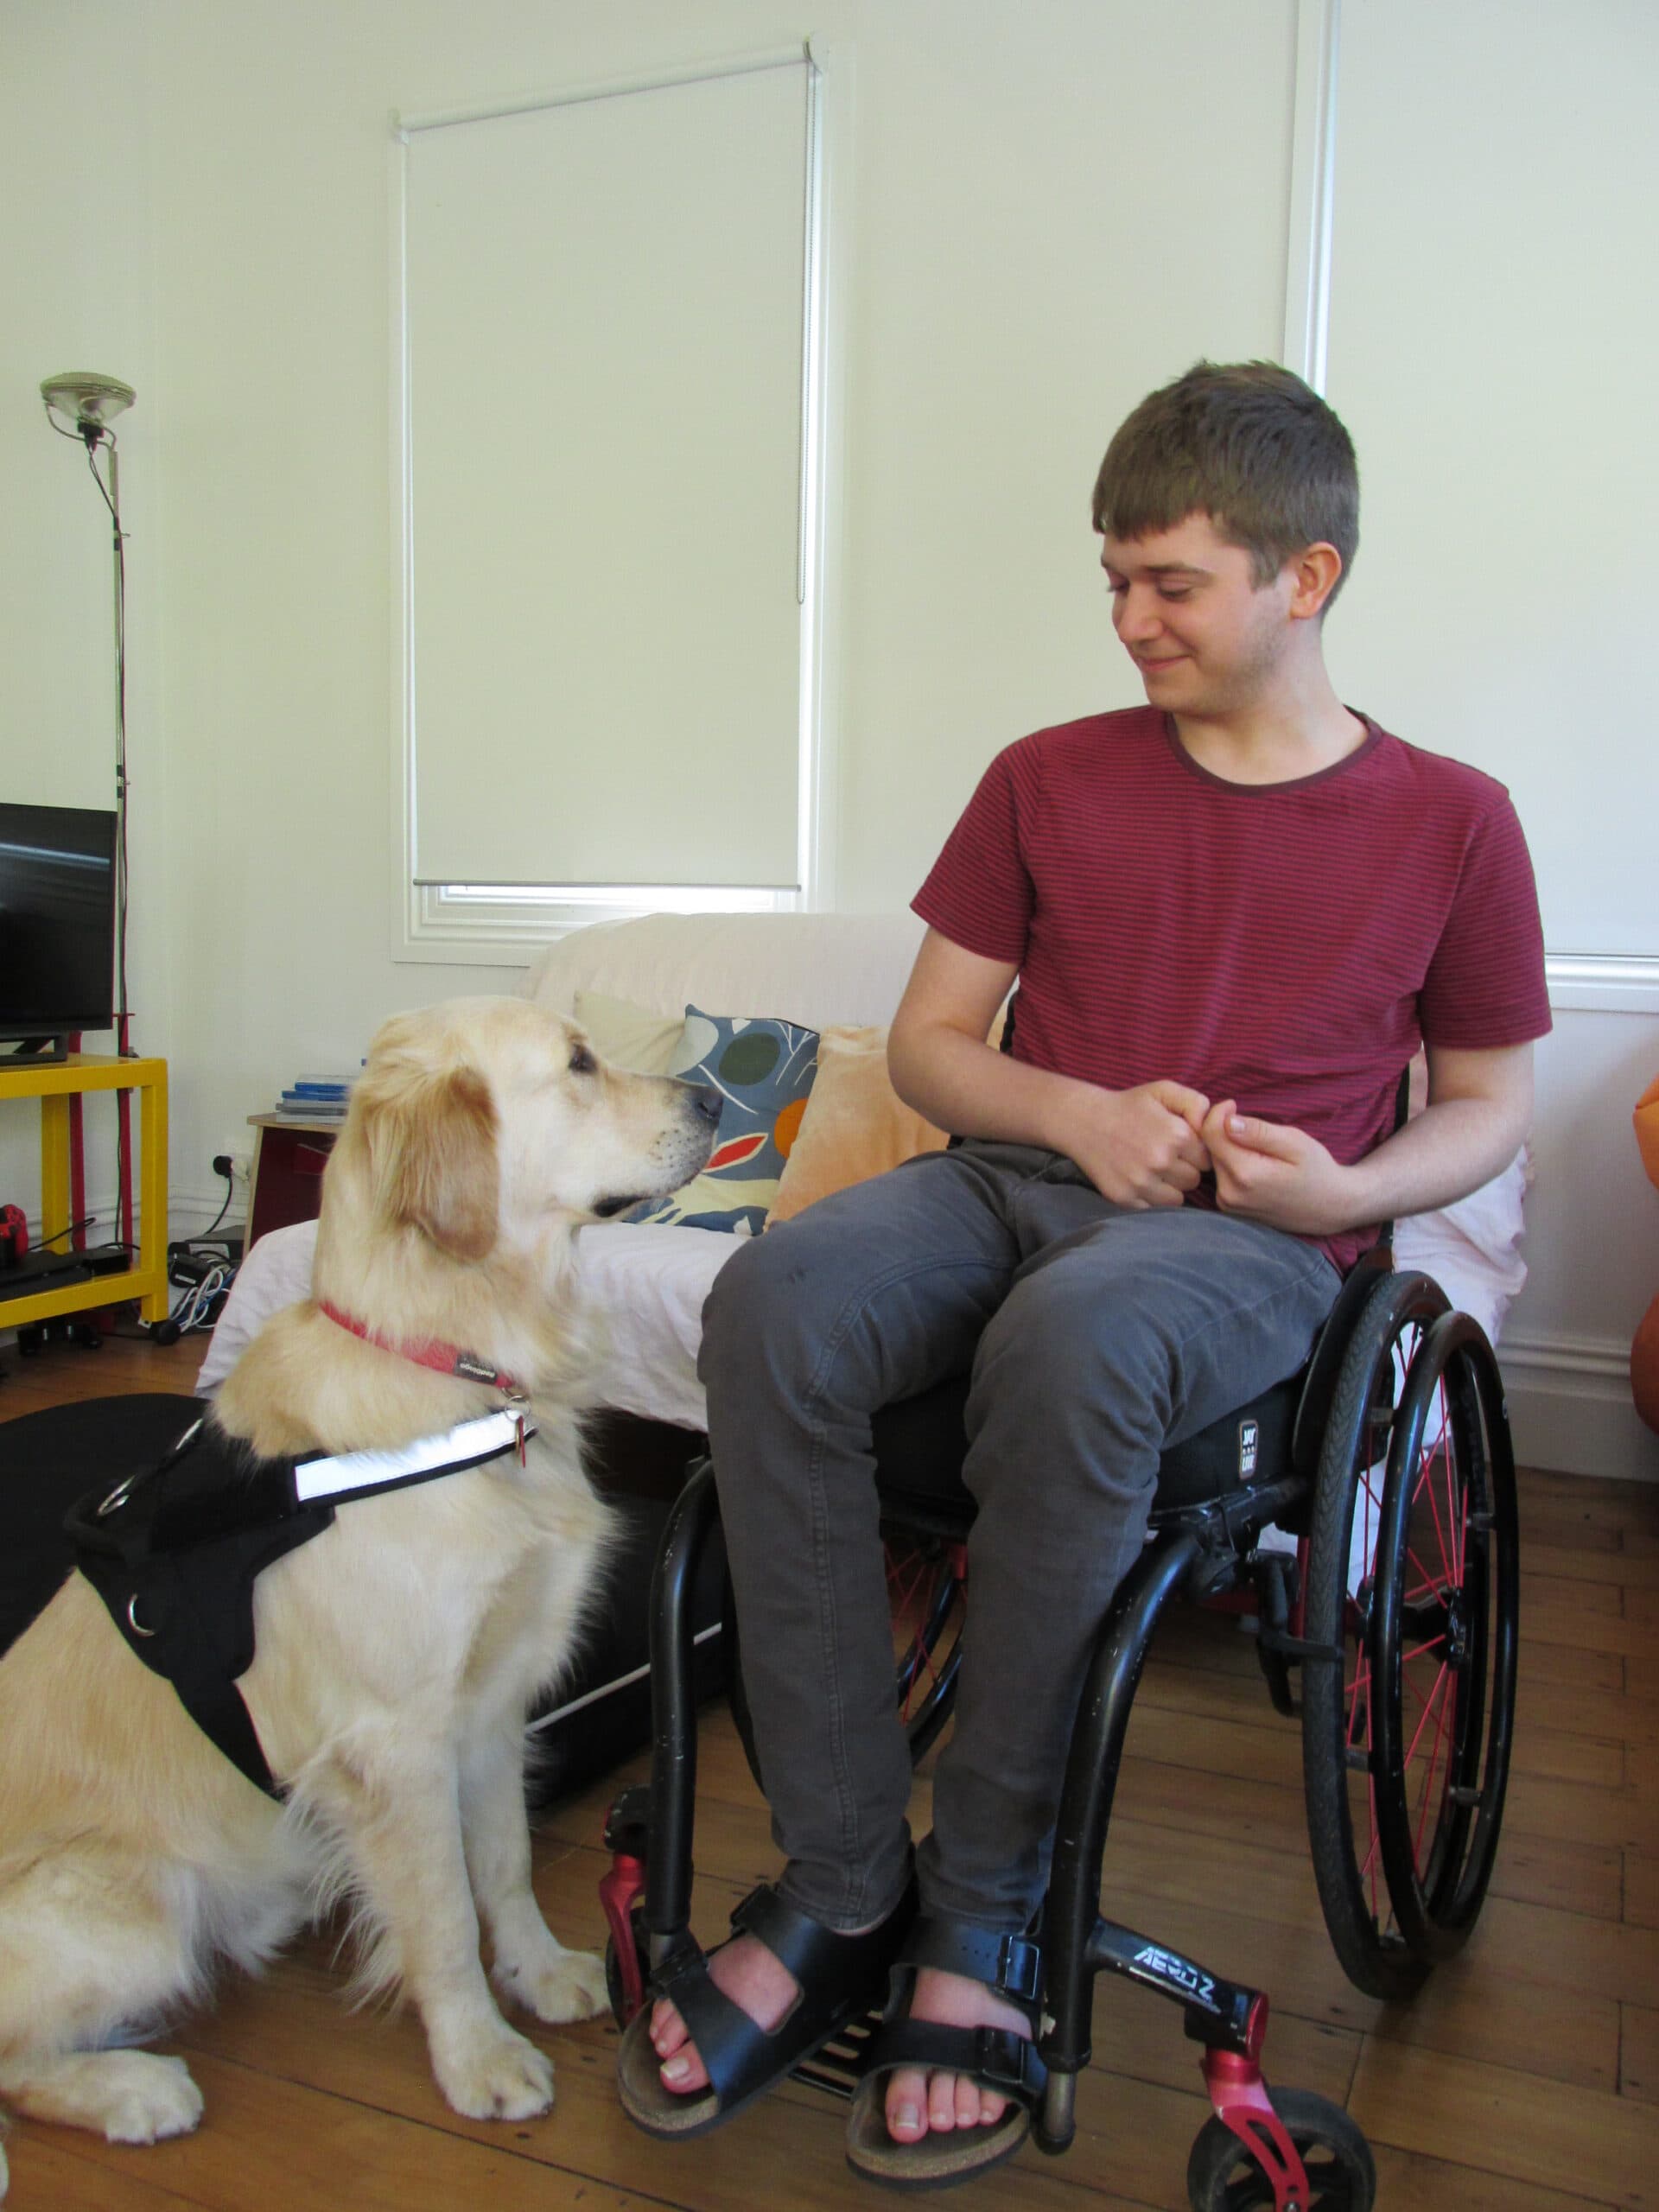 Client Marvin looks adoringly at his Vision Loss Assistance Dog, Mason. Marvin is in a wheelchair.